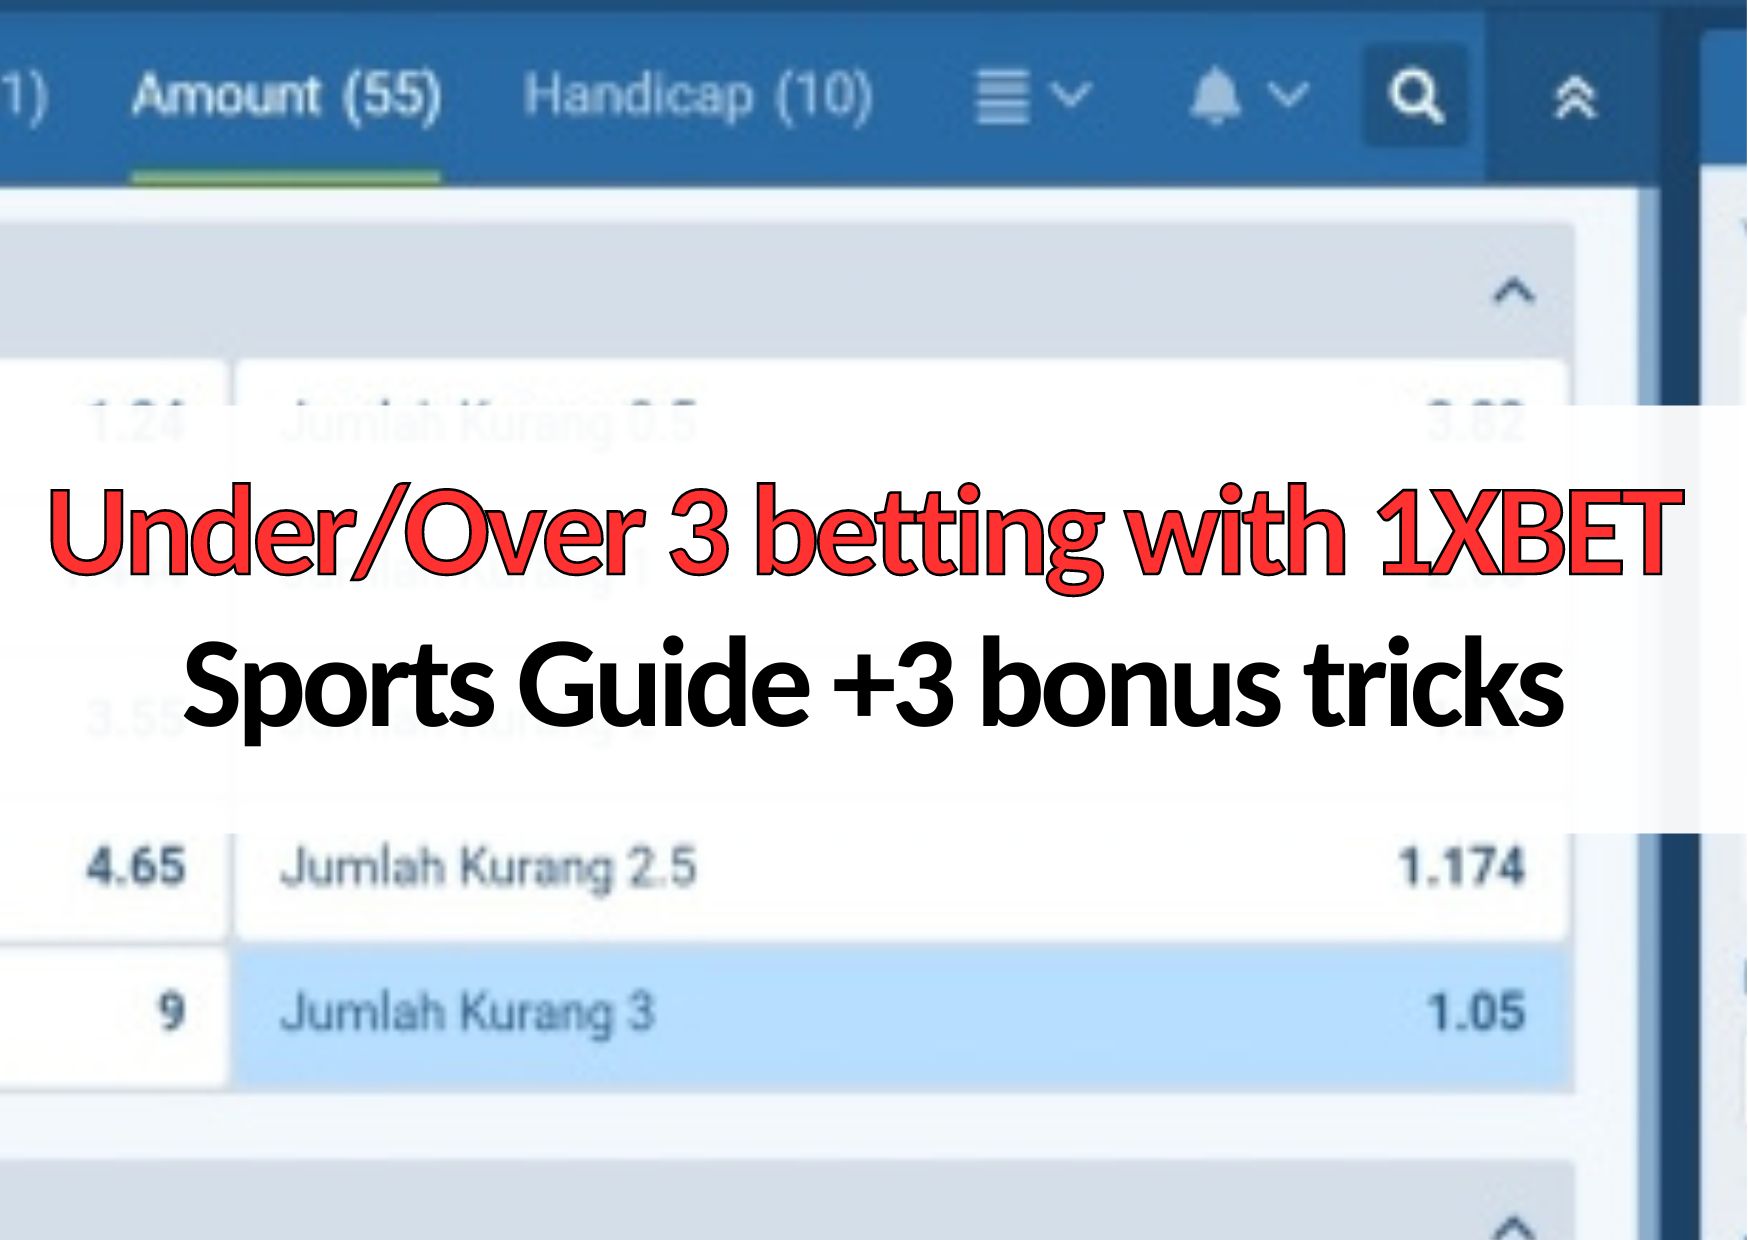 under over 3 betting with 1xbet sports guide and bonus tips